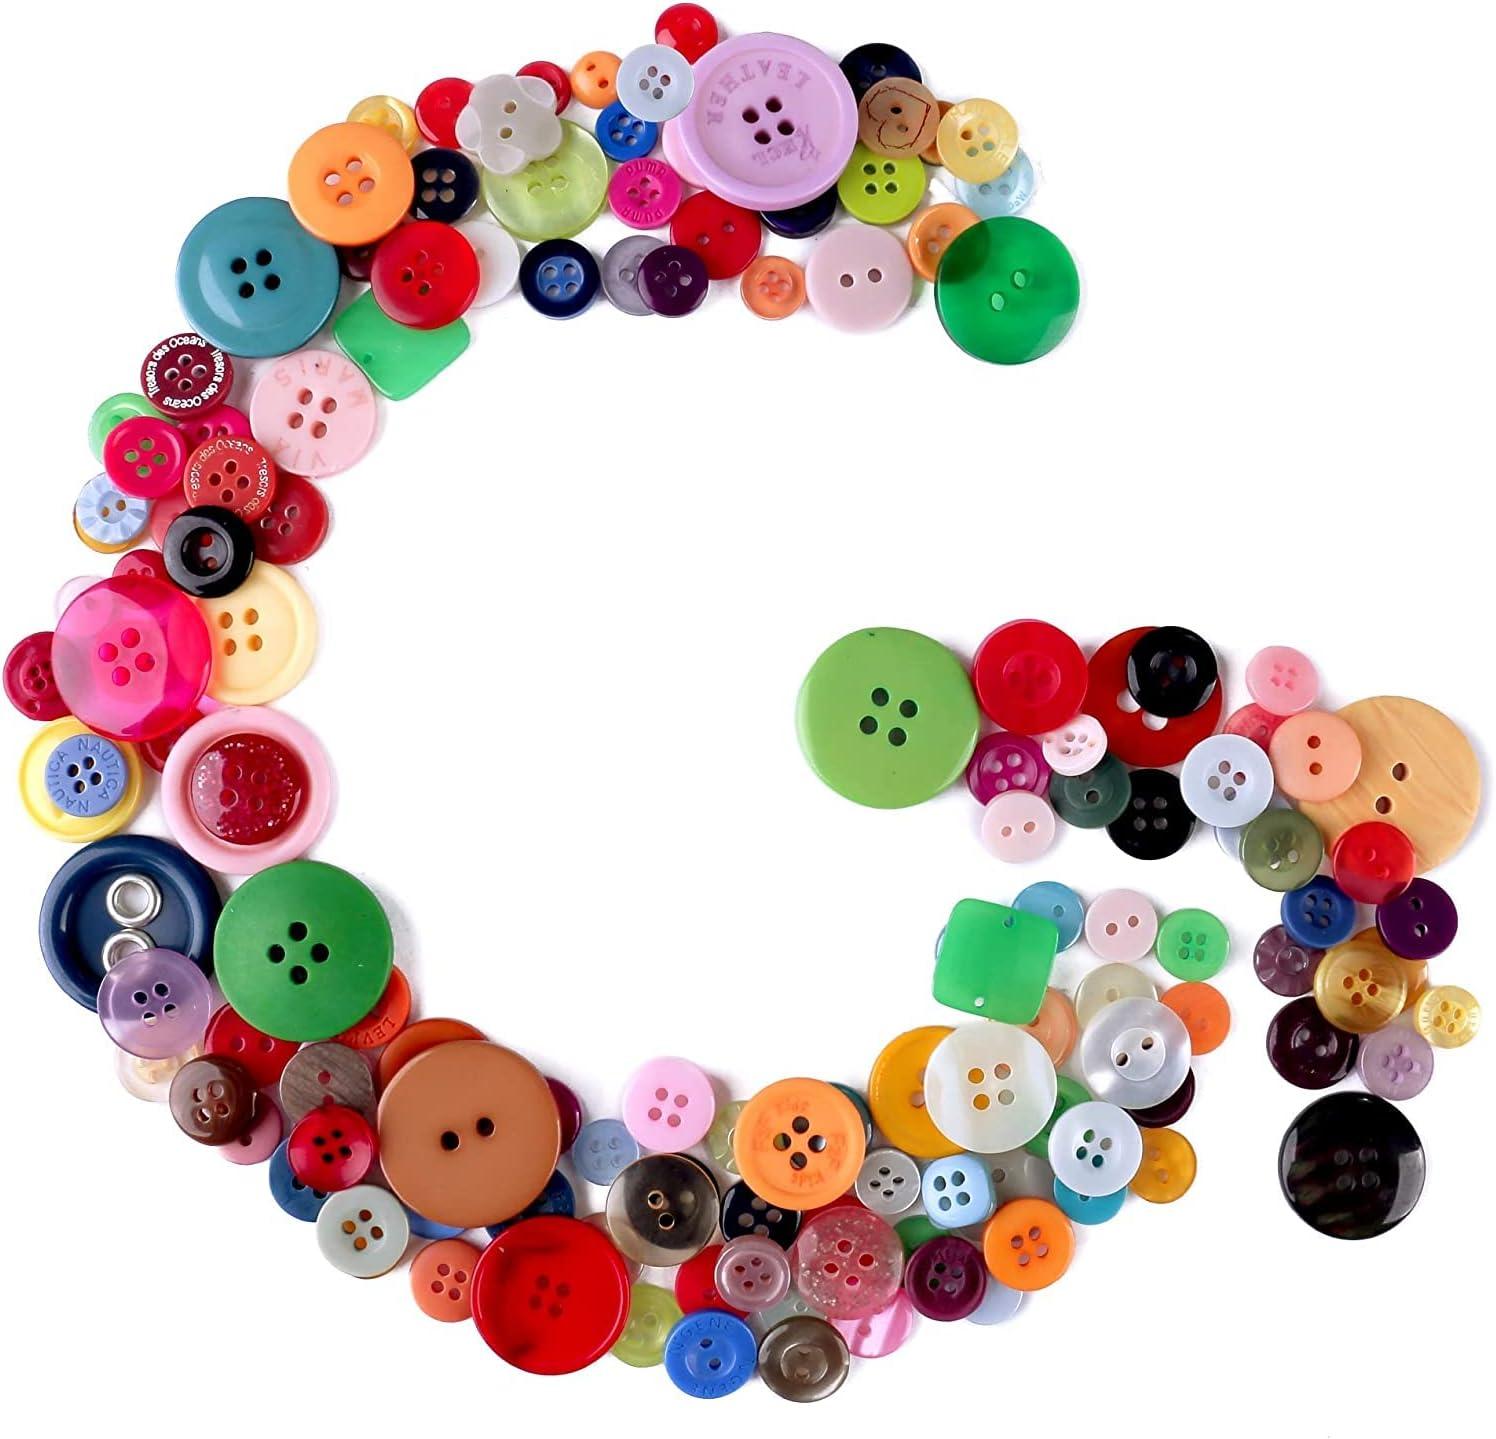 6mm Candy Color Resin Buttons 2 Hole Mini Round Tiny Buttons for